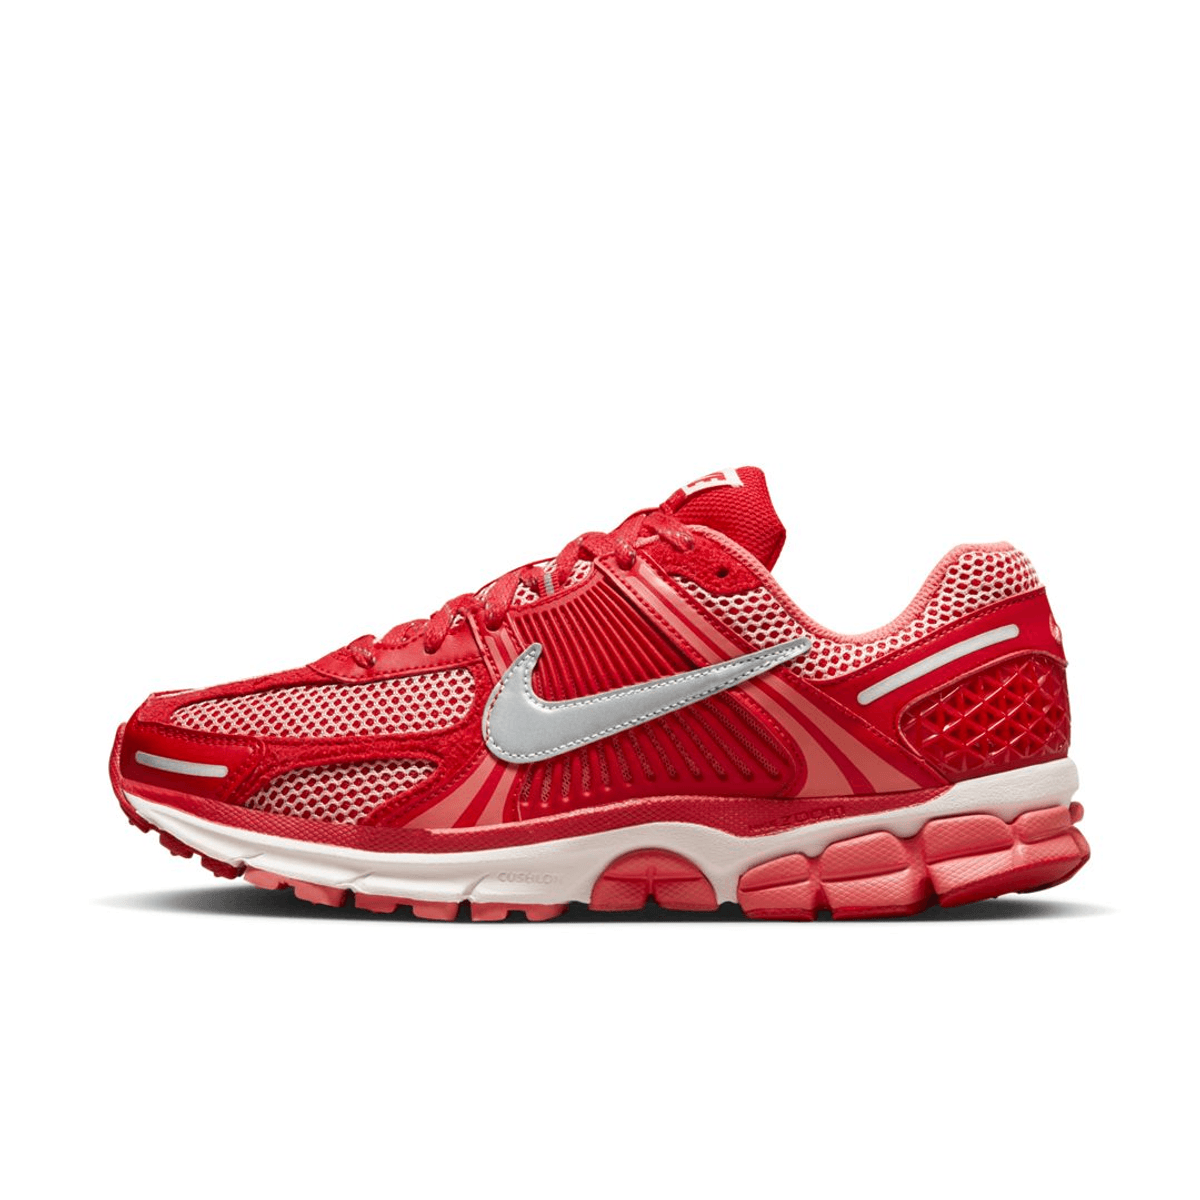 Official Images Of The Nike Zoom Vomero 5 "University Red"